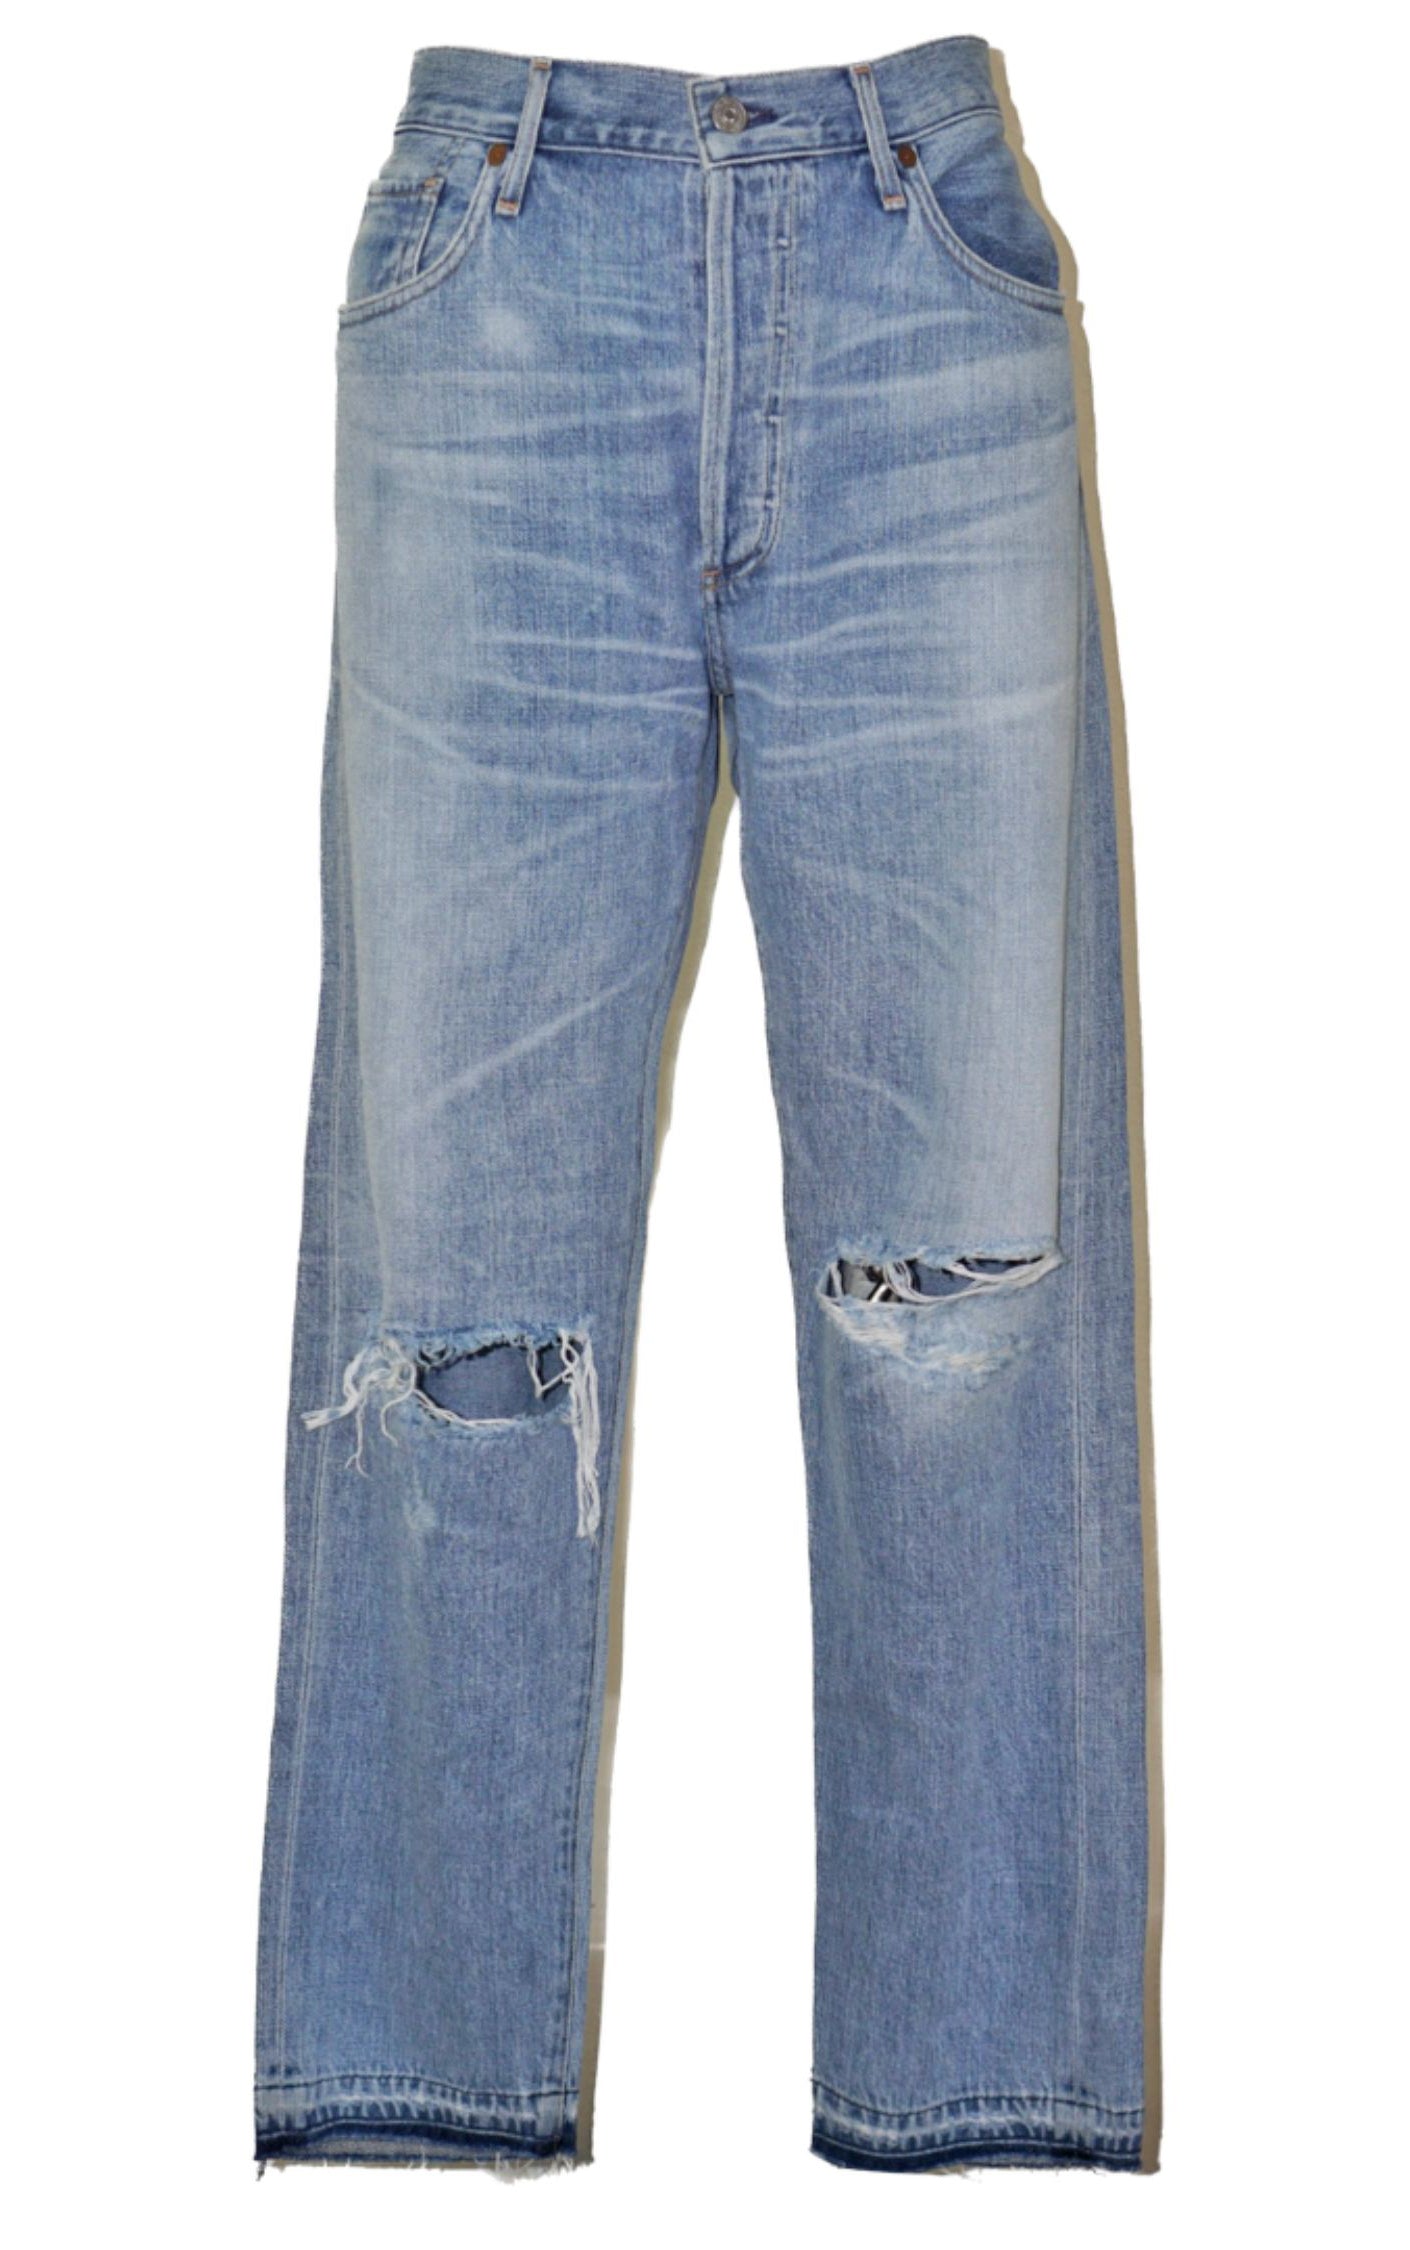 CITIZENS OF HUMANITY Liya High Rise Jeans resellum